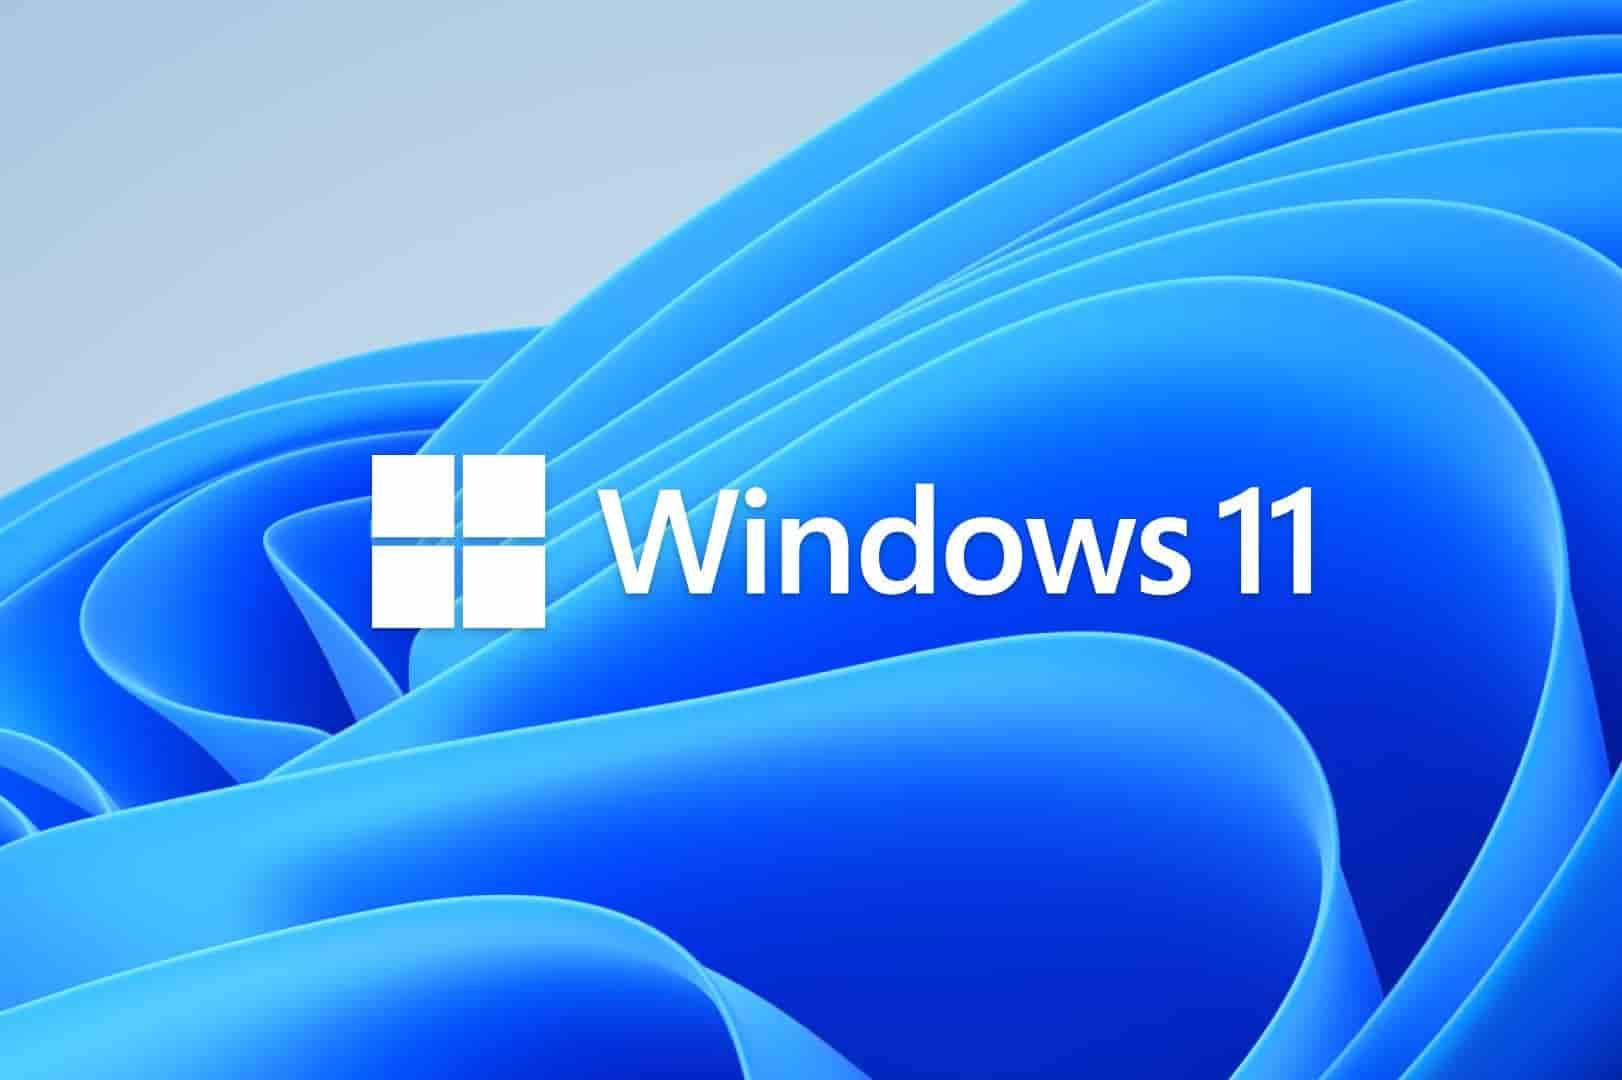 How to install windows 11 in your PC?